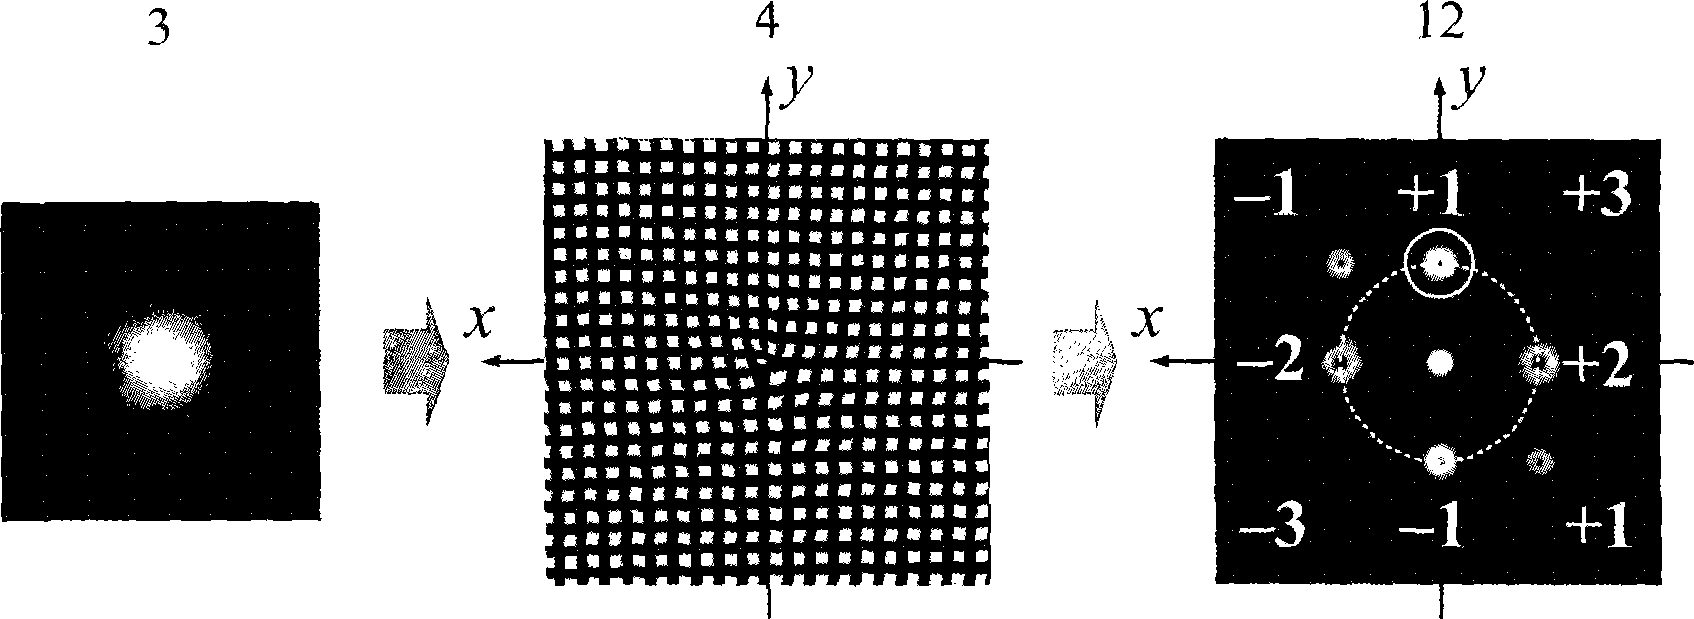 Apparatus for implementing orbit angular momentum state super position and modulation